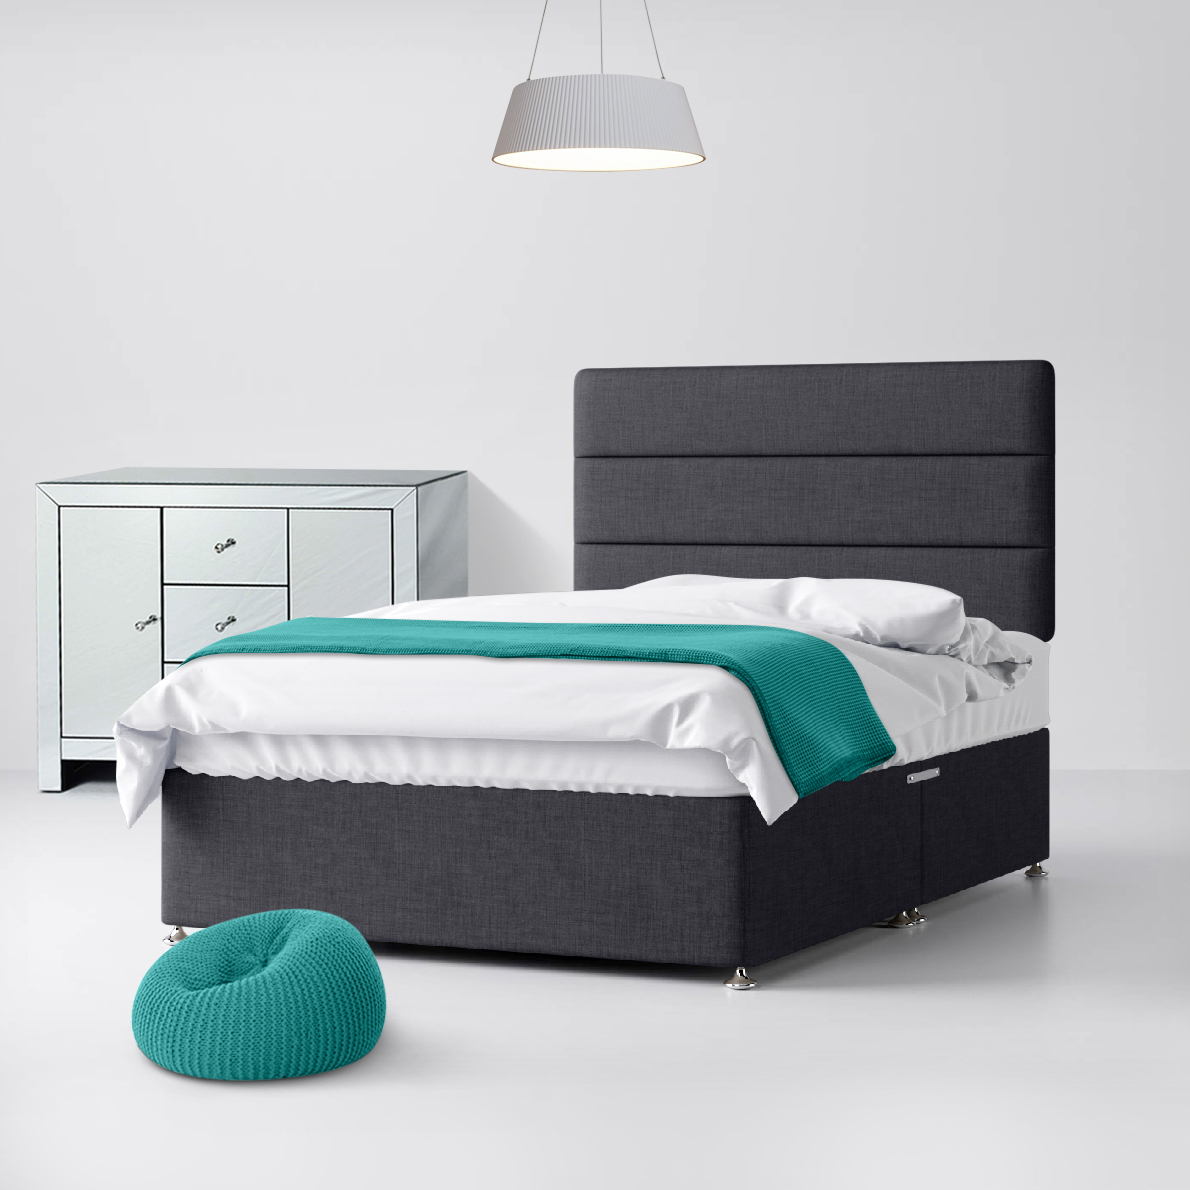 King Size - Divan Bed and Cornell Lined Headboard - Dark Grey - Charcoal - Fabric - 5ft - Happy Beds